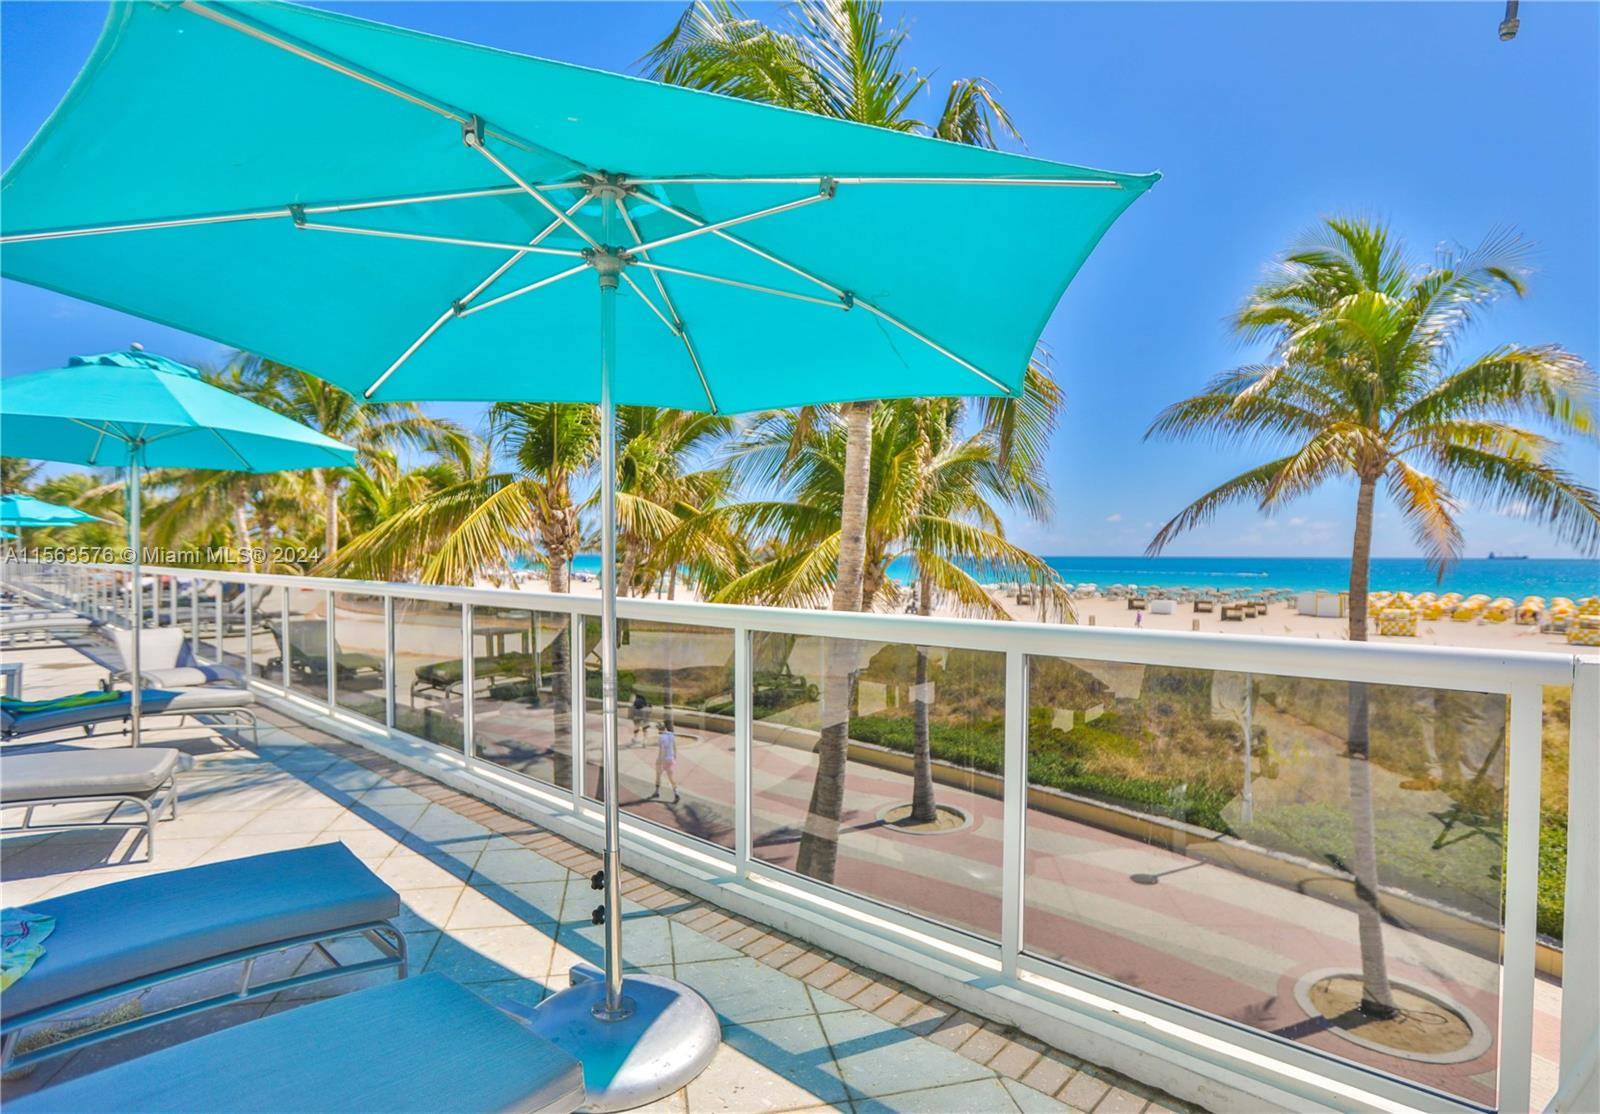 Direct on the beach, 9th floor corner 1 1 unit with Attached Studio with its own bathroom and fully equipped kitchen for guest, in laws or as separate rental opportunity ...